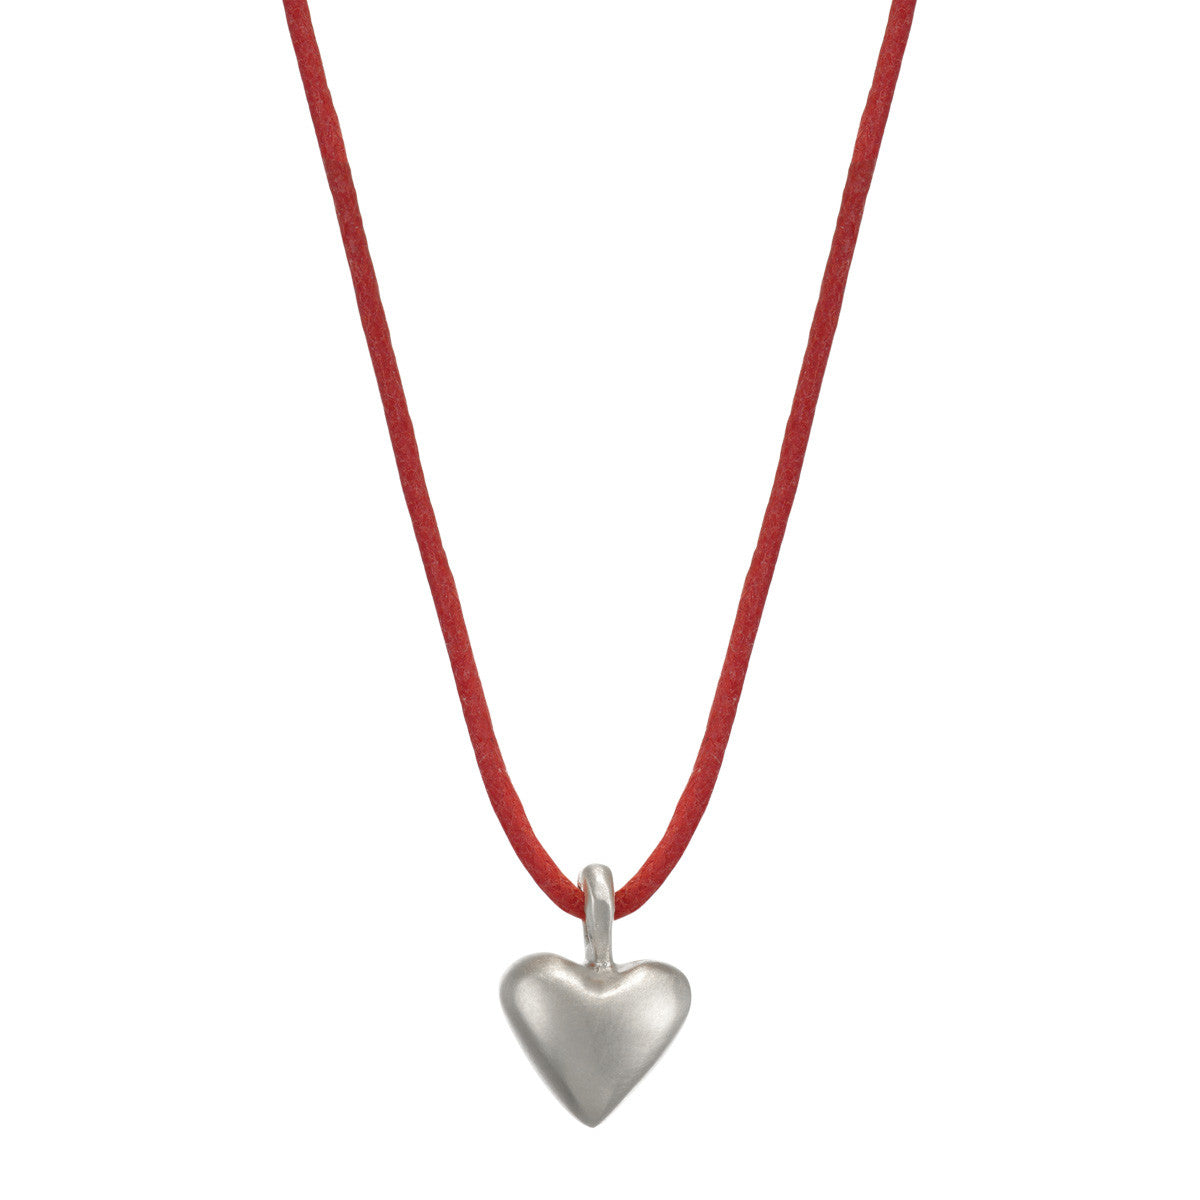 Men's Sterling Silver Locket Necklace - Heart of Courage